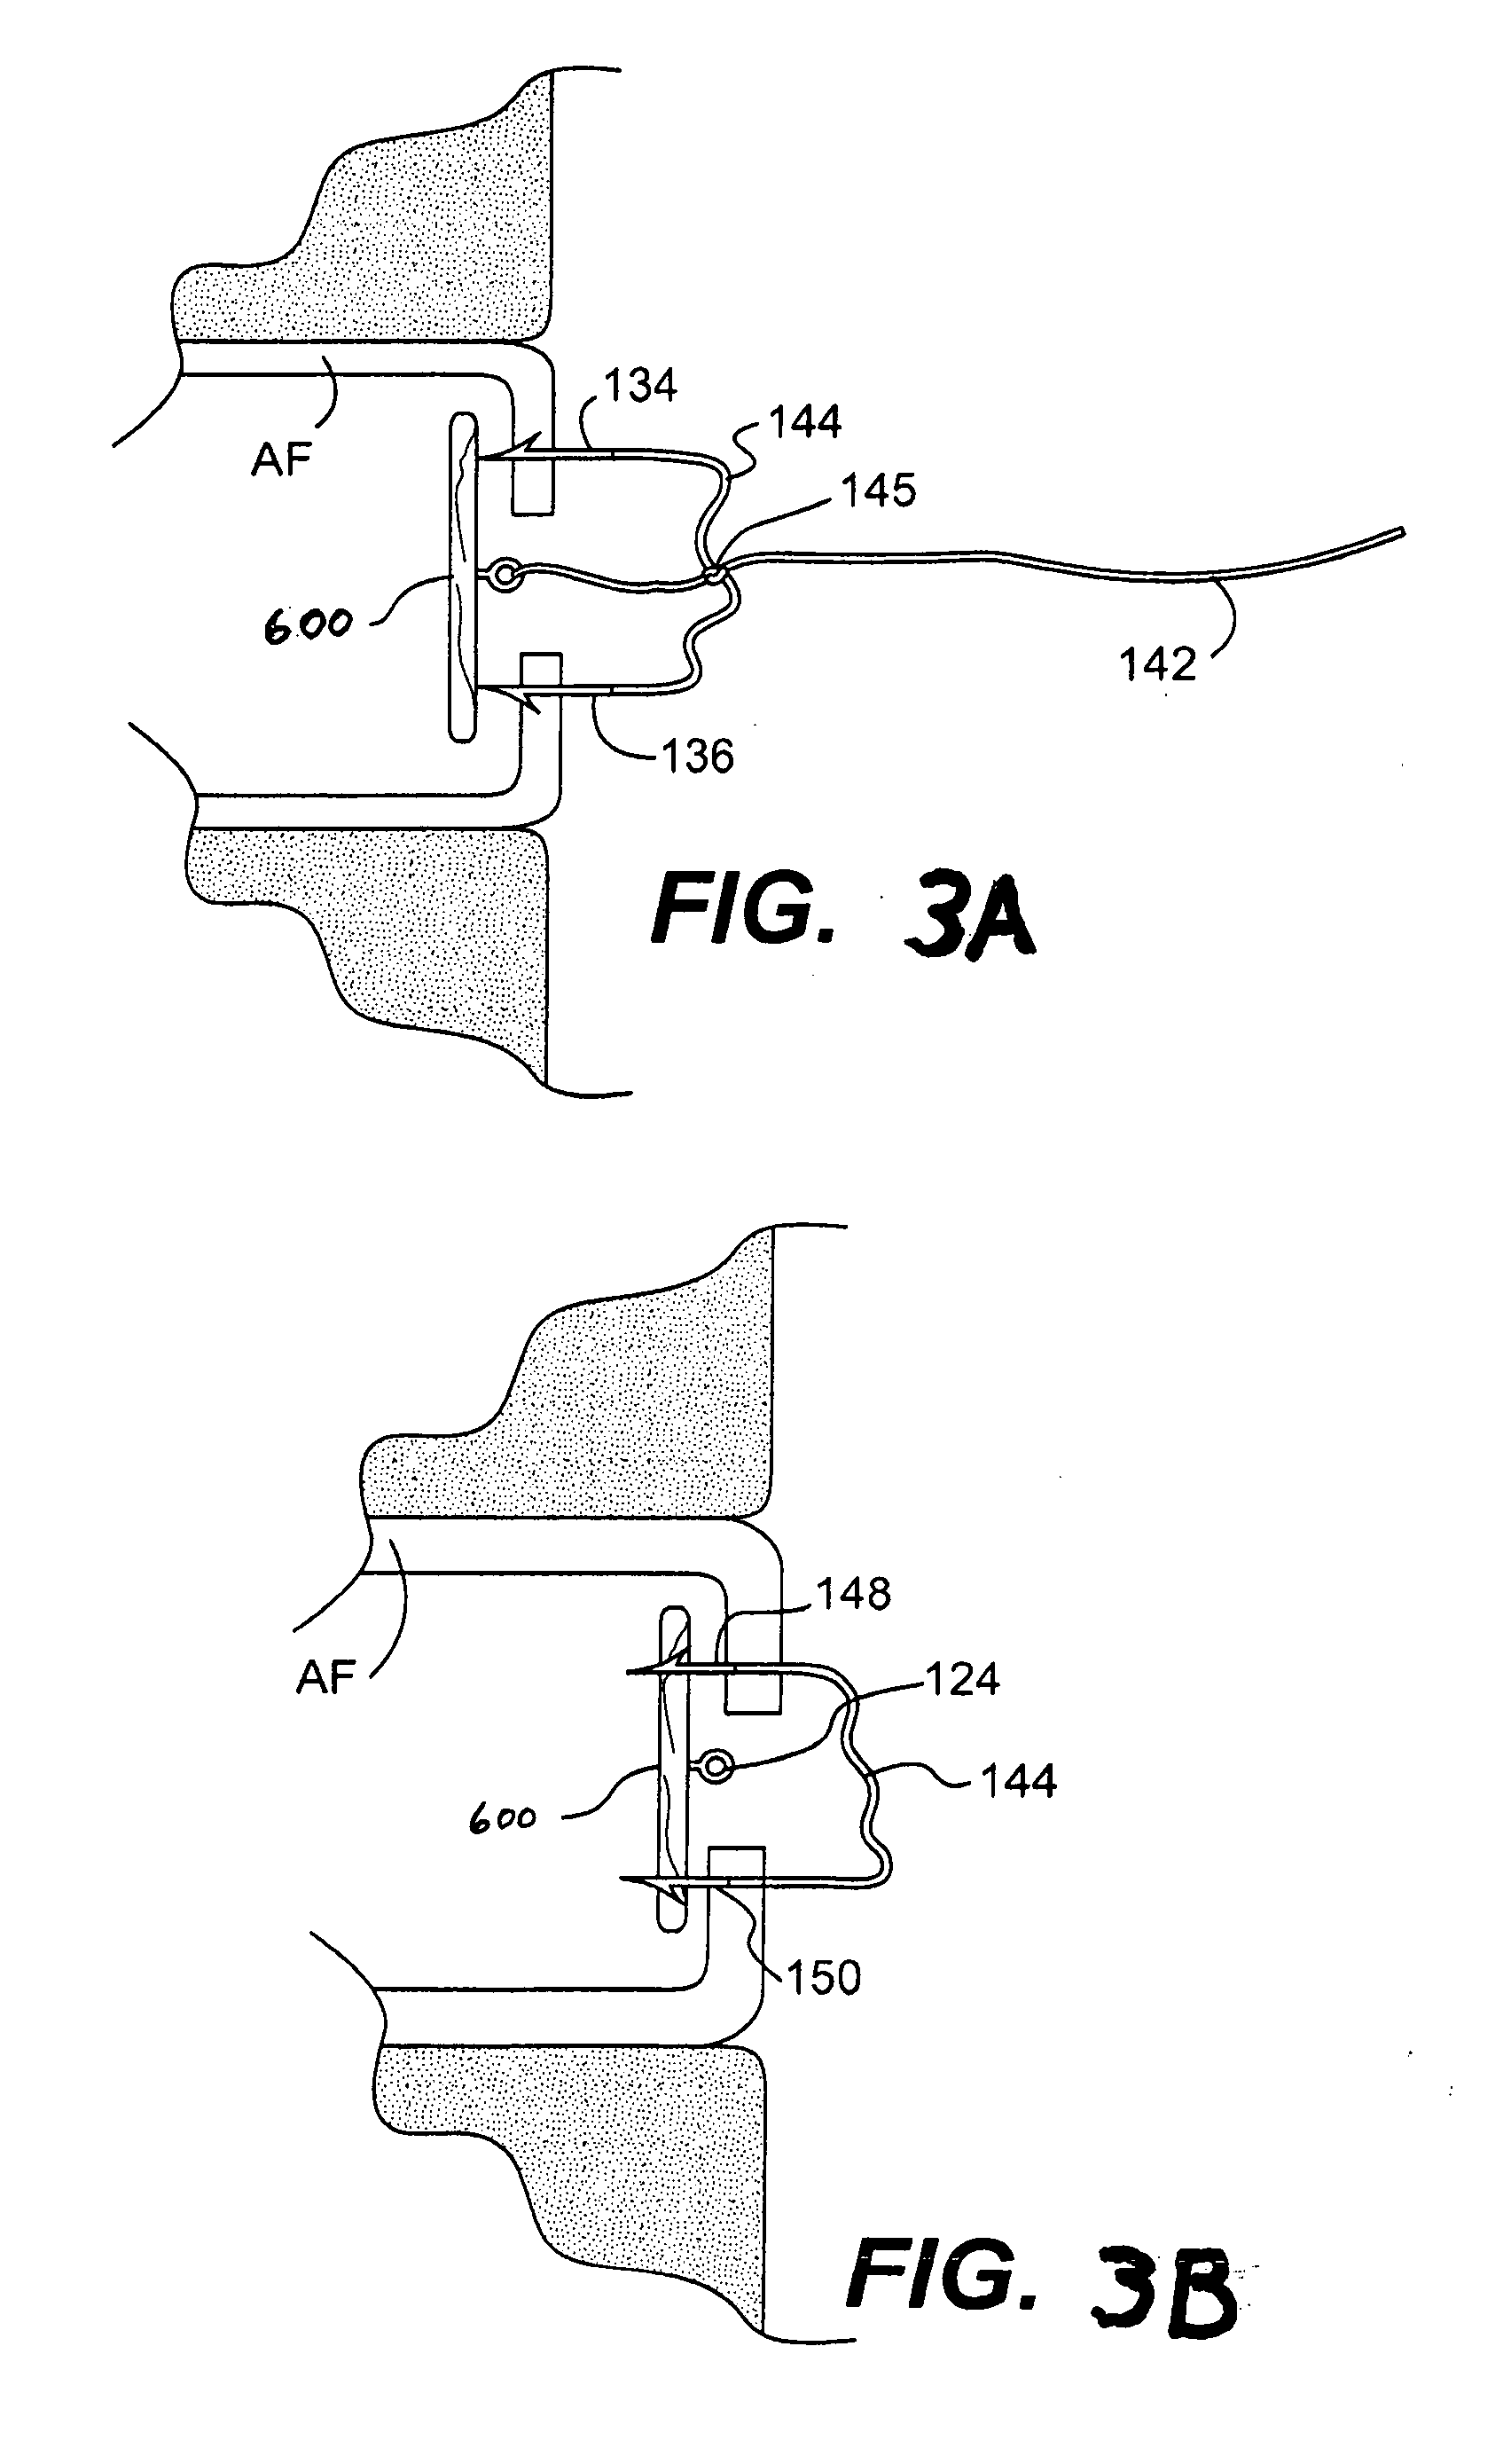 Apparatus and methods for the treatment of the intervertebral disc